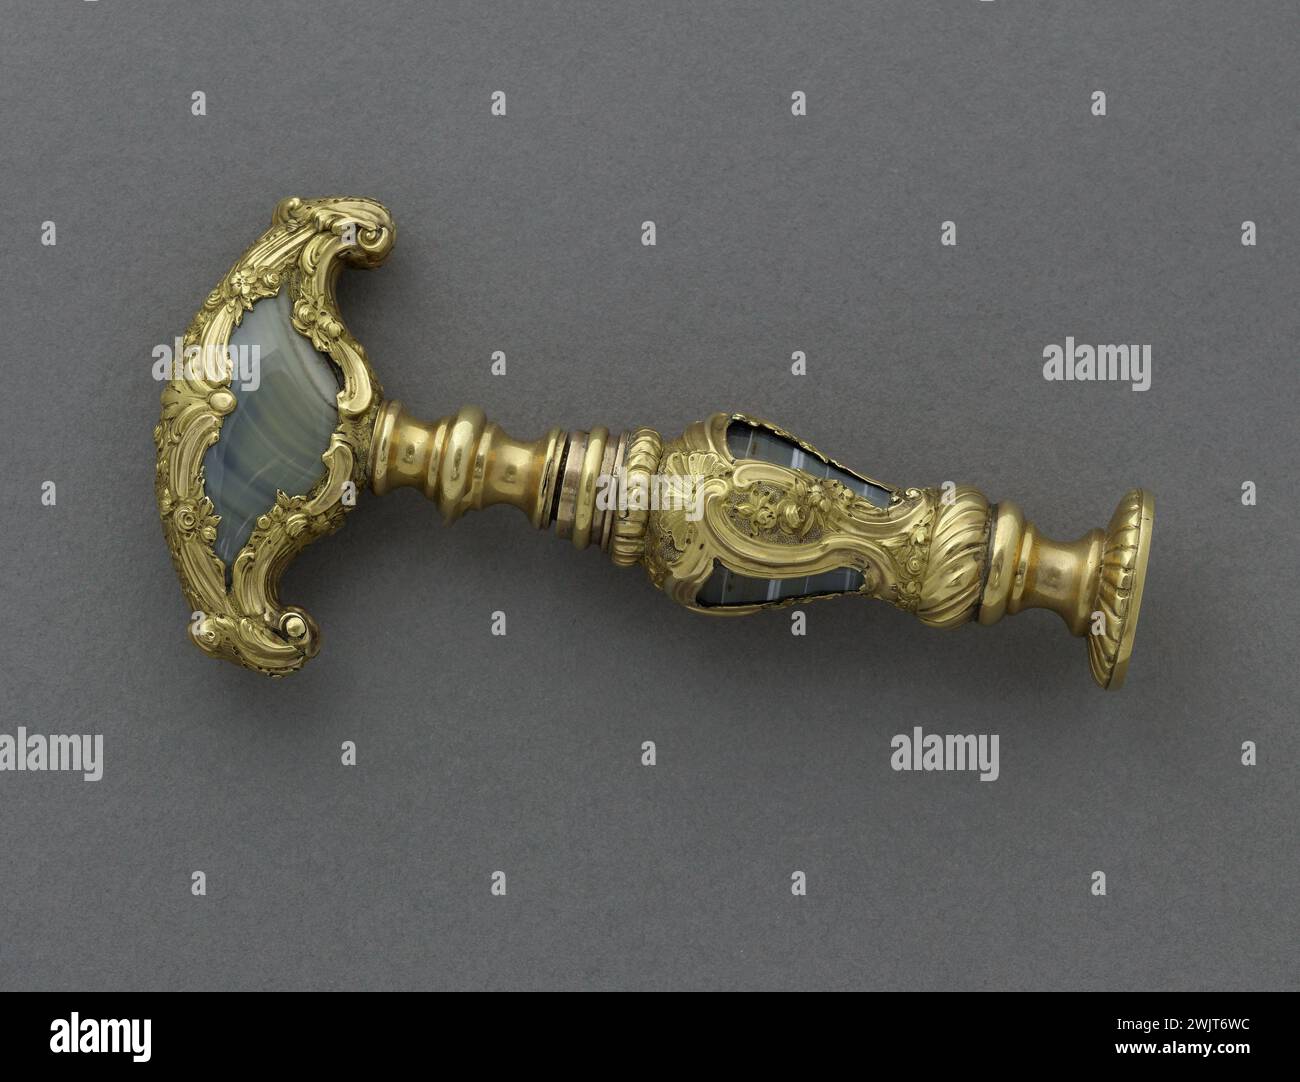 Corkscrew. Agate and gold pushed, openwork and chiseled. England (?), Midenish 18th century. Paris, Cognacq-Jay museum. 36972-2 Agate, opening, chisel, art object, gold pushing, goldsmith, corkscrew Stock Photo